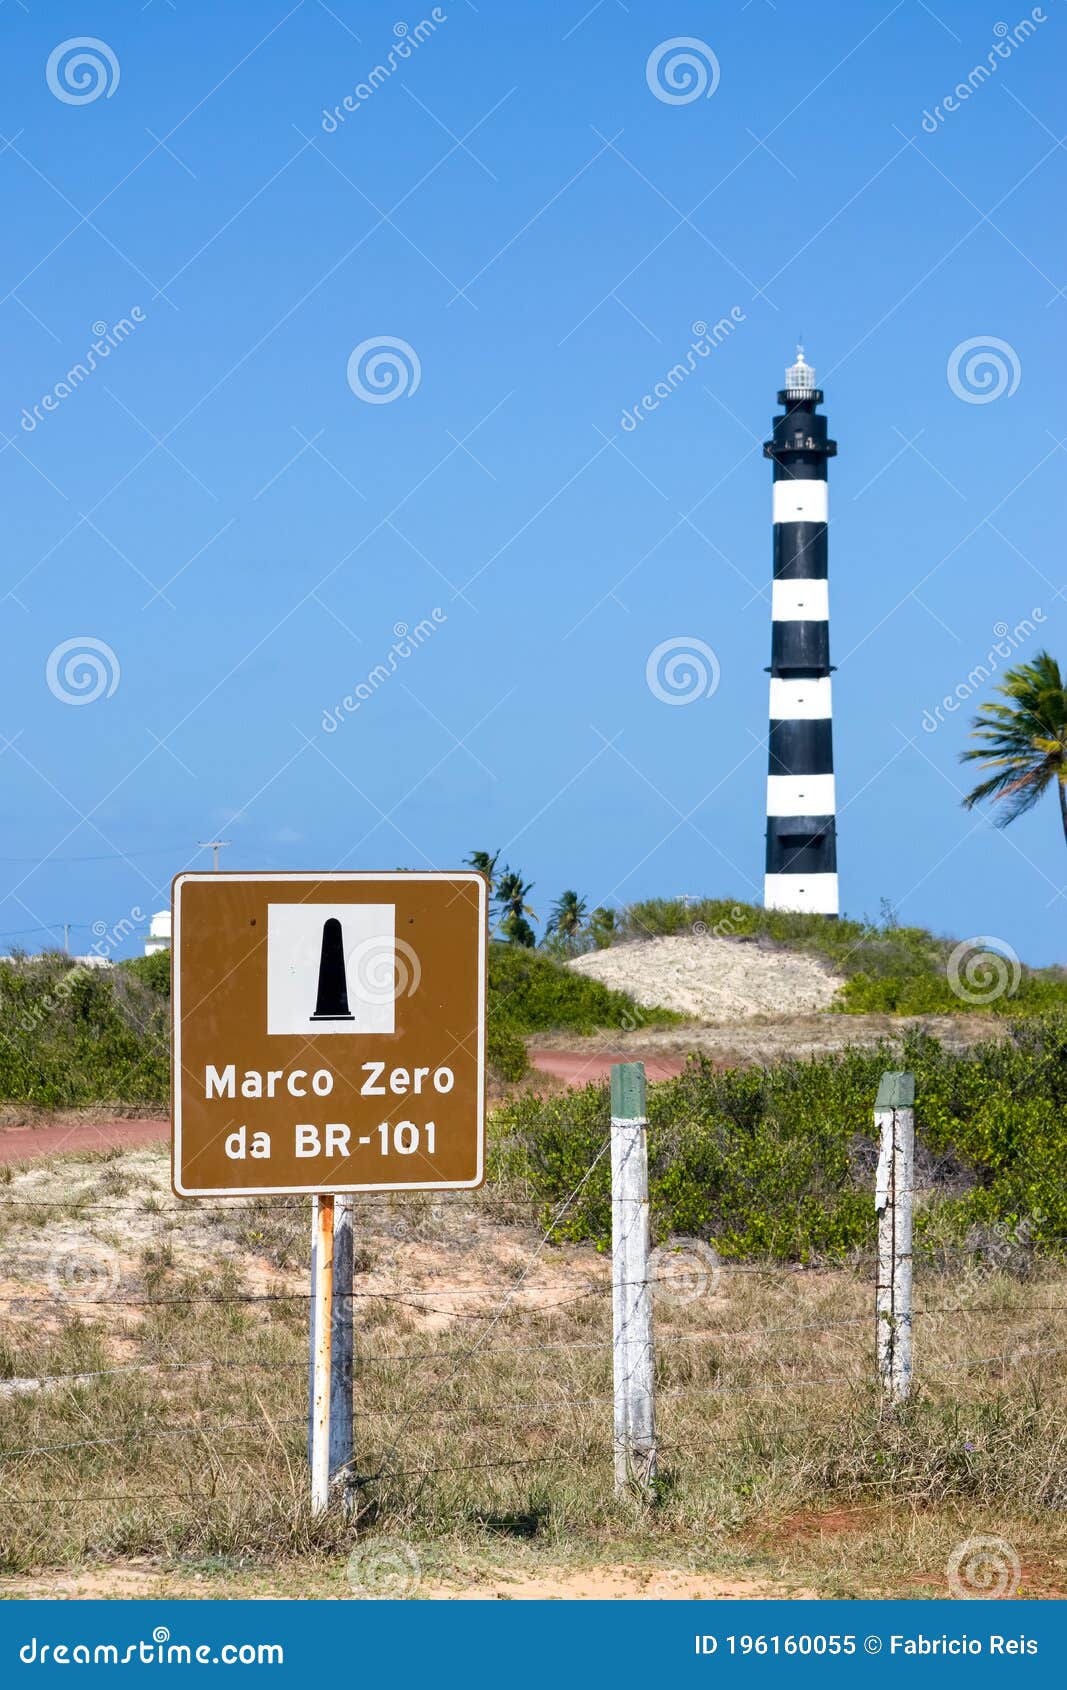 the calcanhar lighthouse and the beginning of the br-101, the largest highway in brazil.